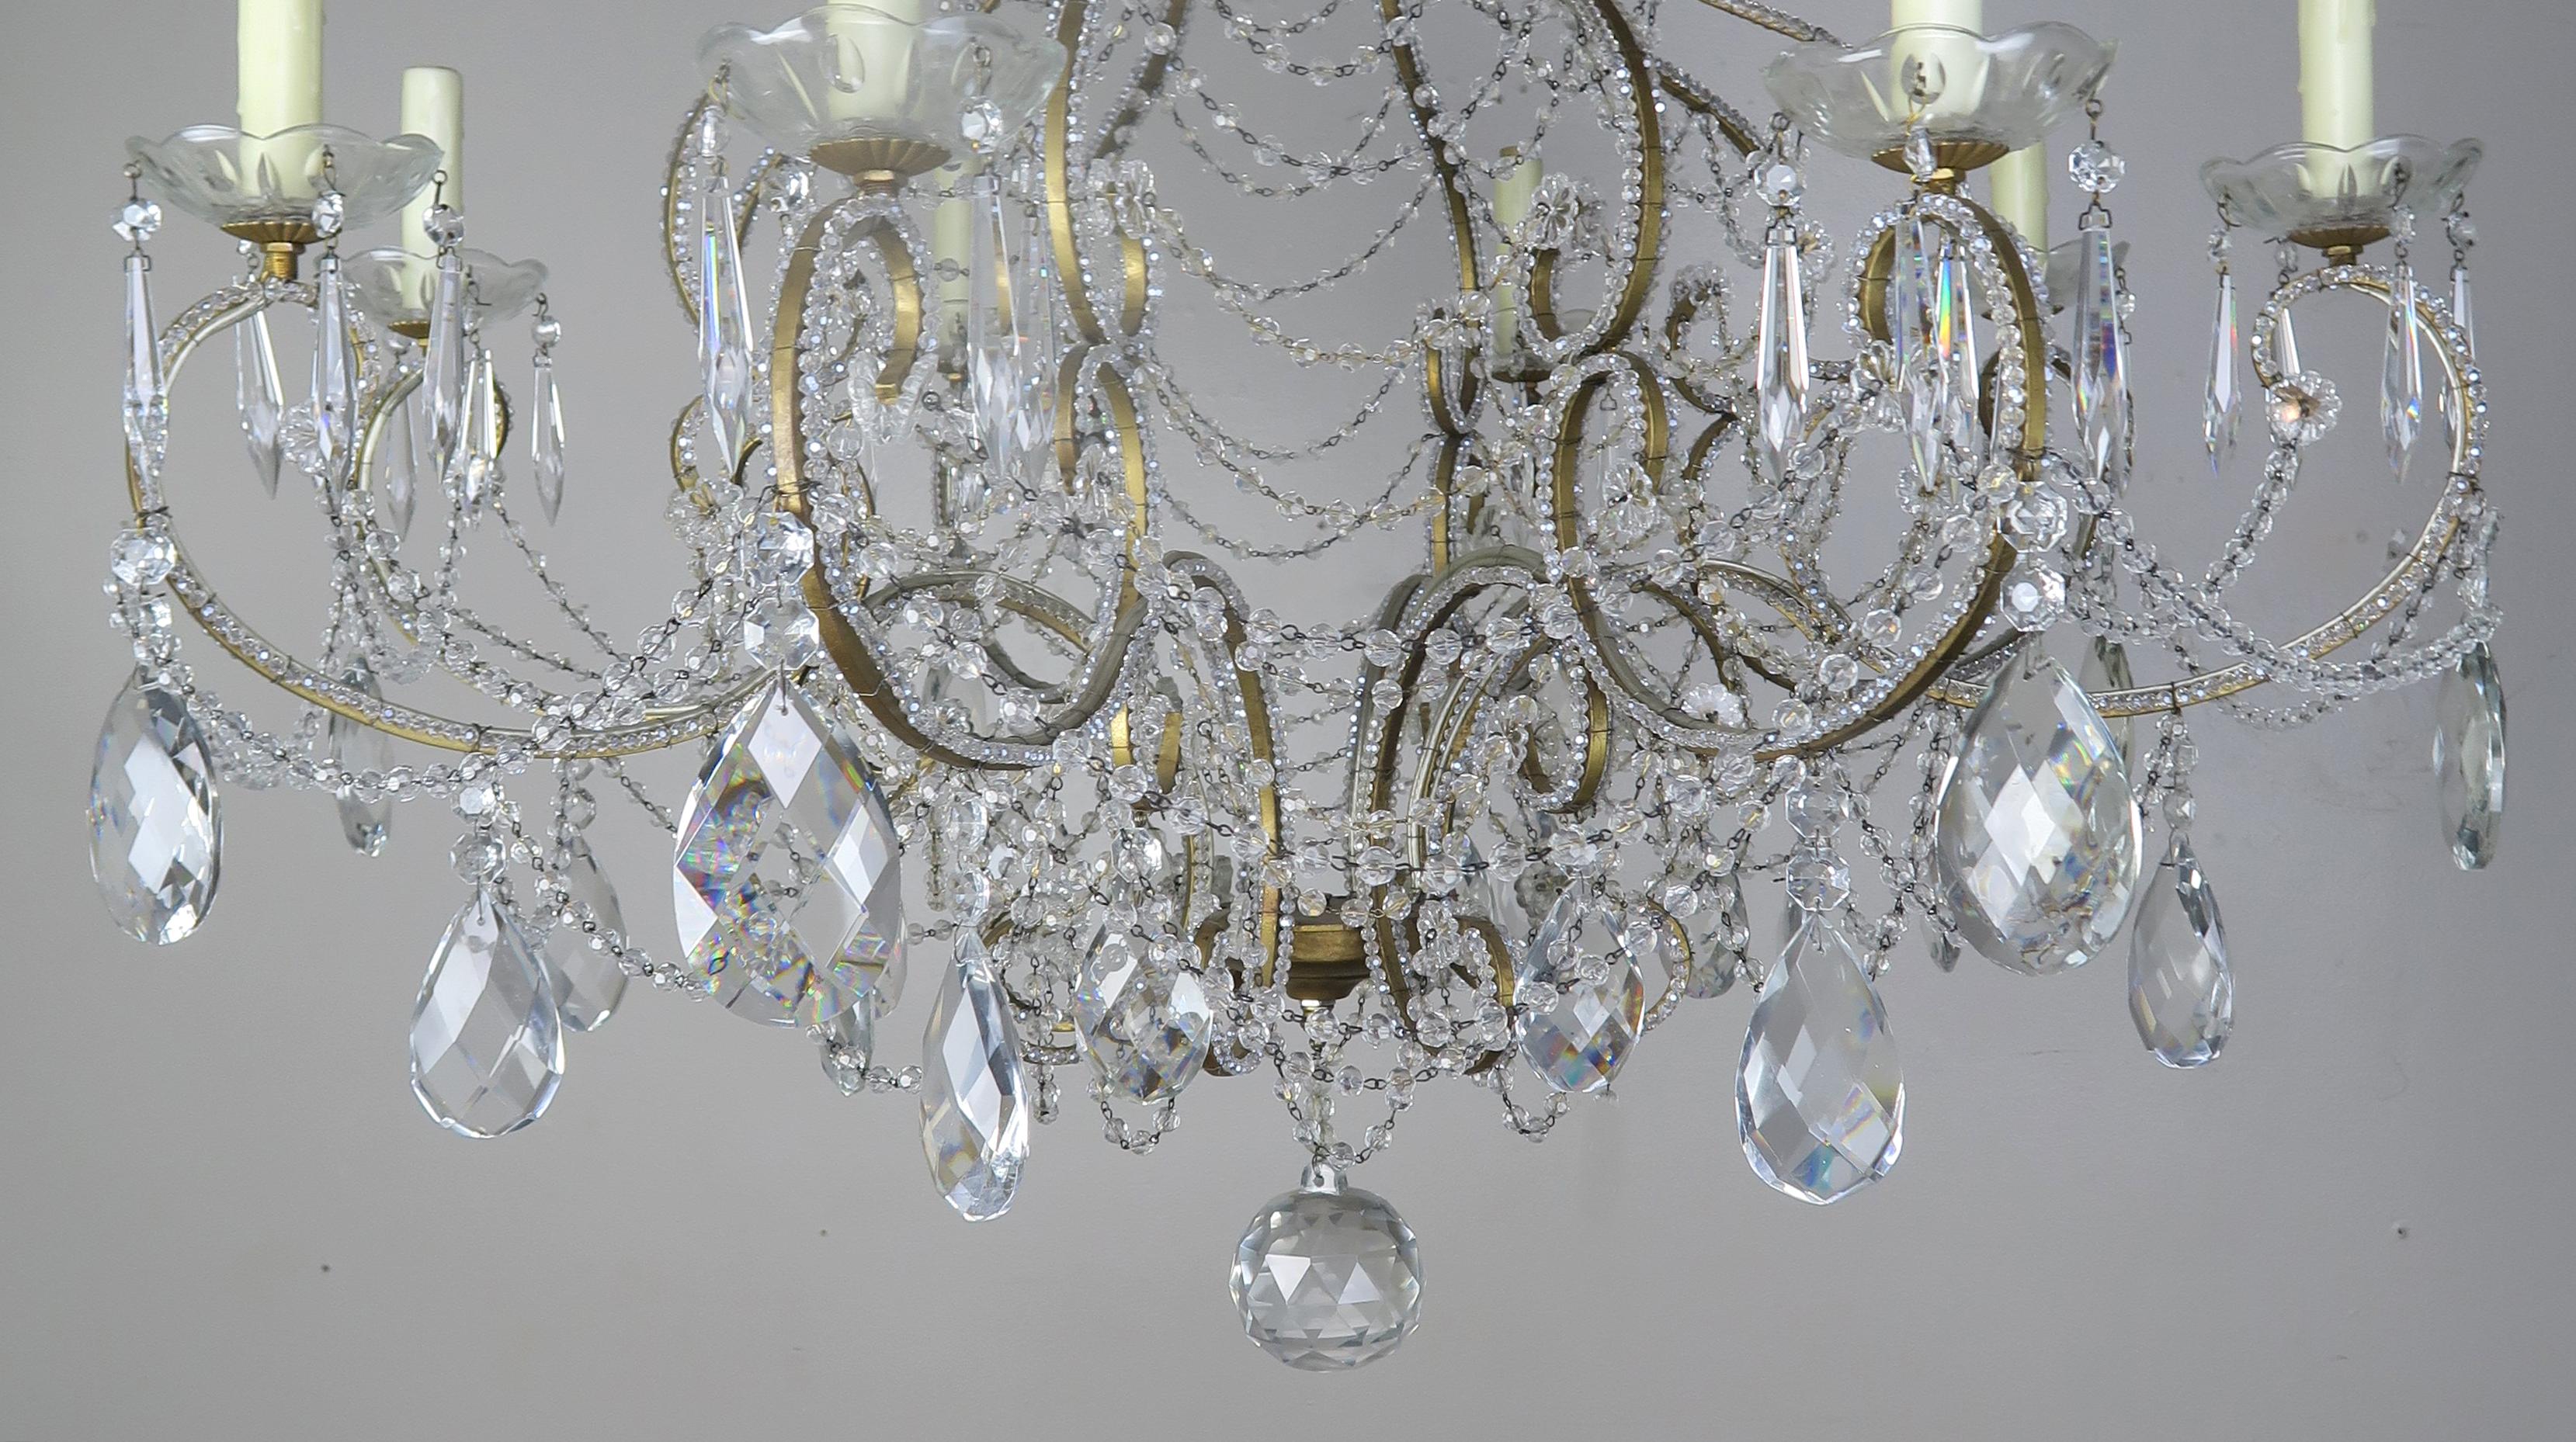 French crystal beaded 8-arm chandelier with faceted almond shaped crystals throughout. The fixture is adorned with garlands of English cut beads throughout as well. The fixture is newly rewired with cream colored drip wax candle covers. Includes